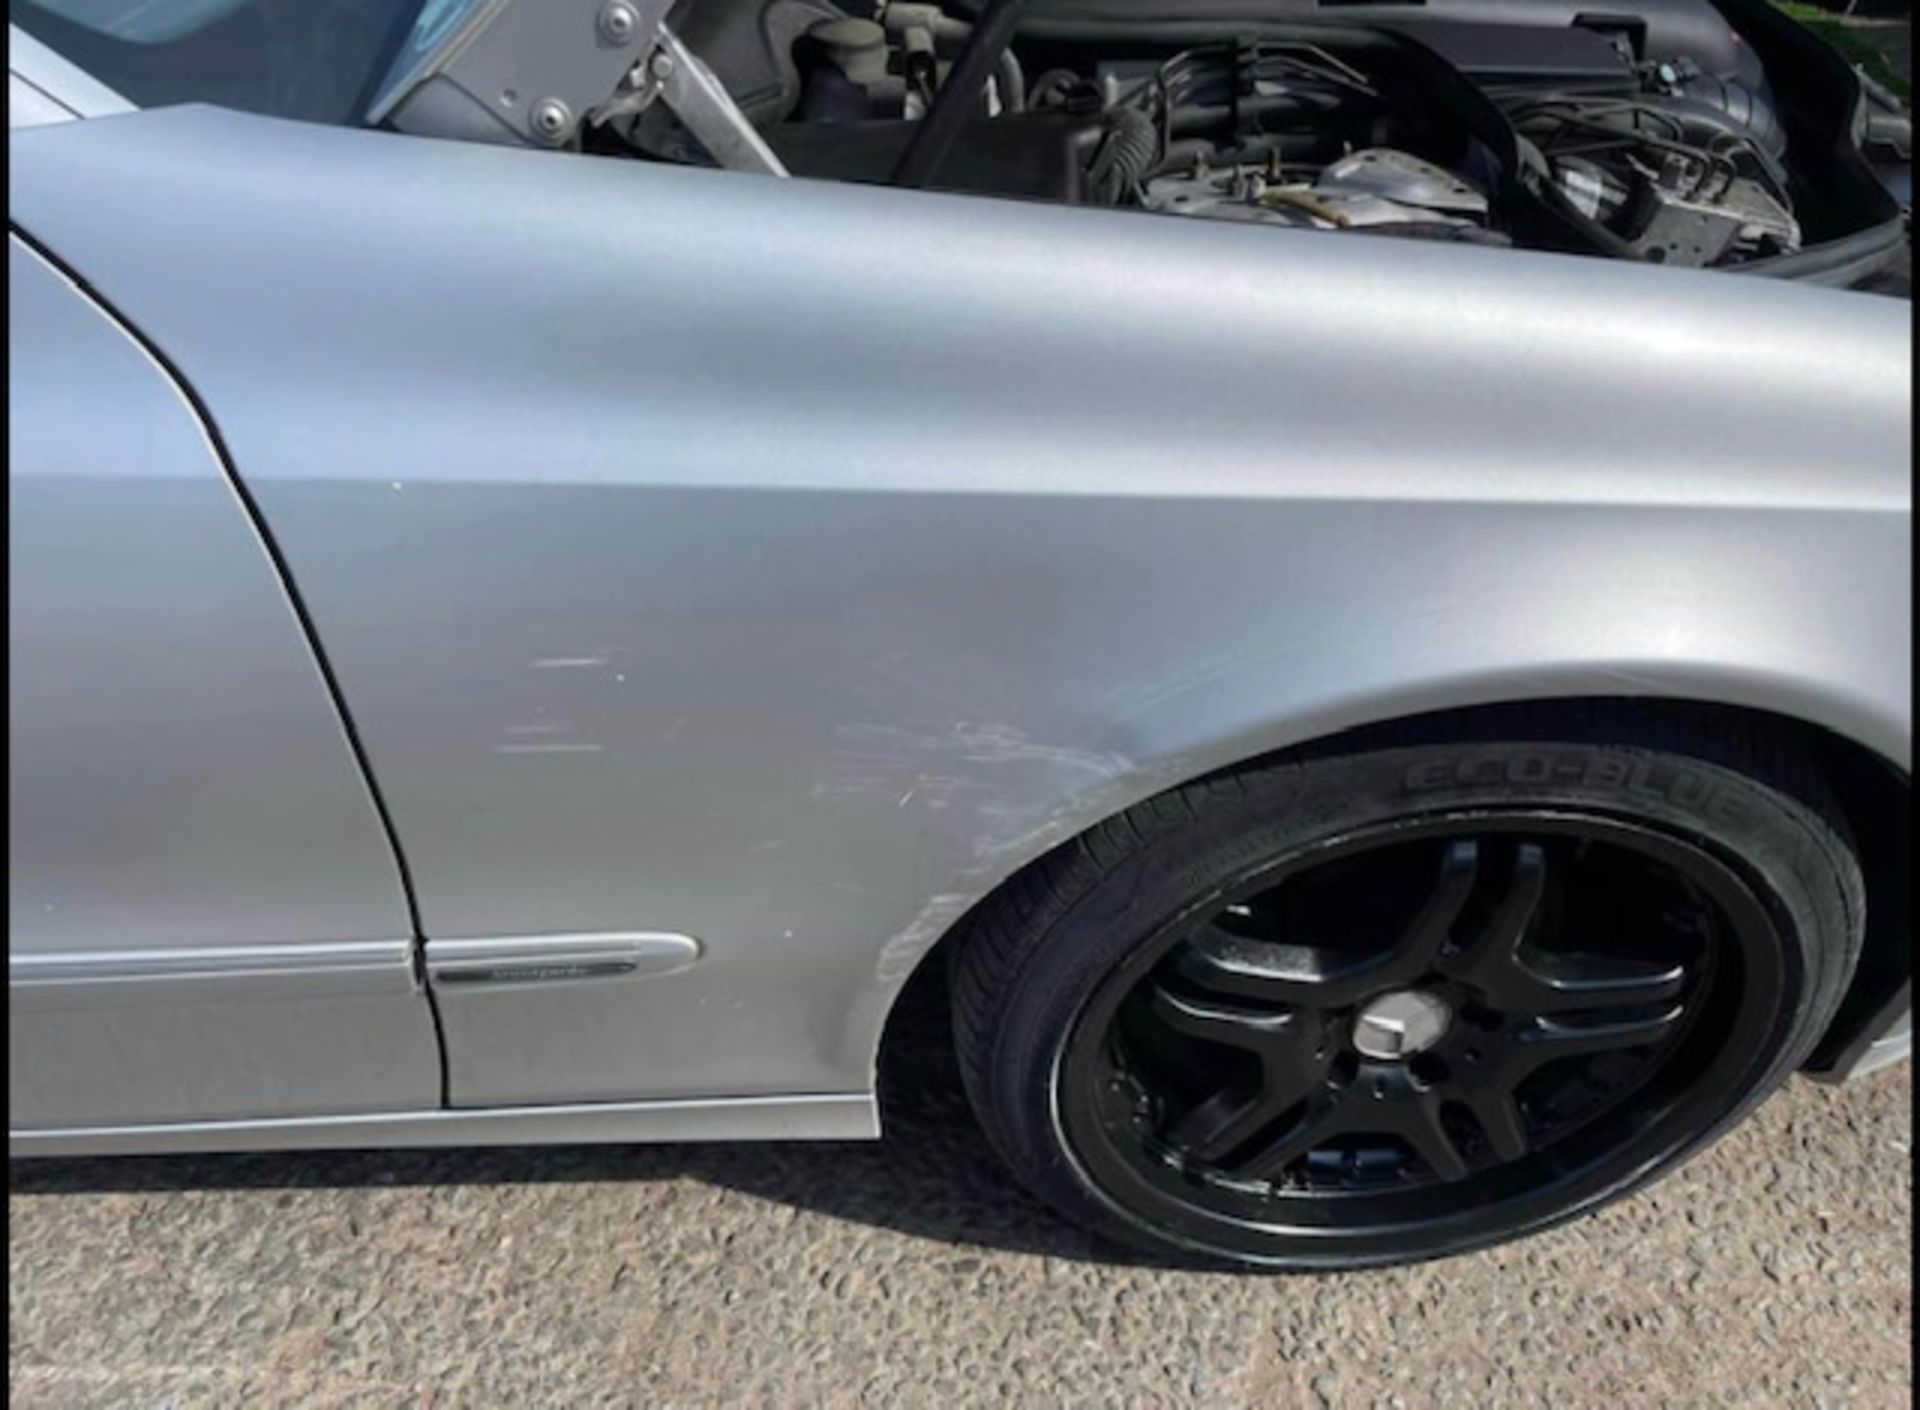 Mercedes E320 CDI 103k genuine miles ,as per pictures has scratches as shown in photos but is all in - Image 9 of 14